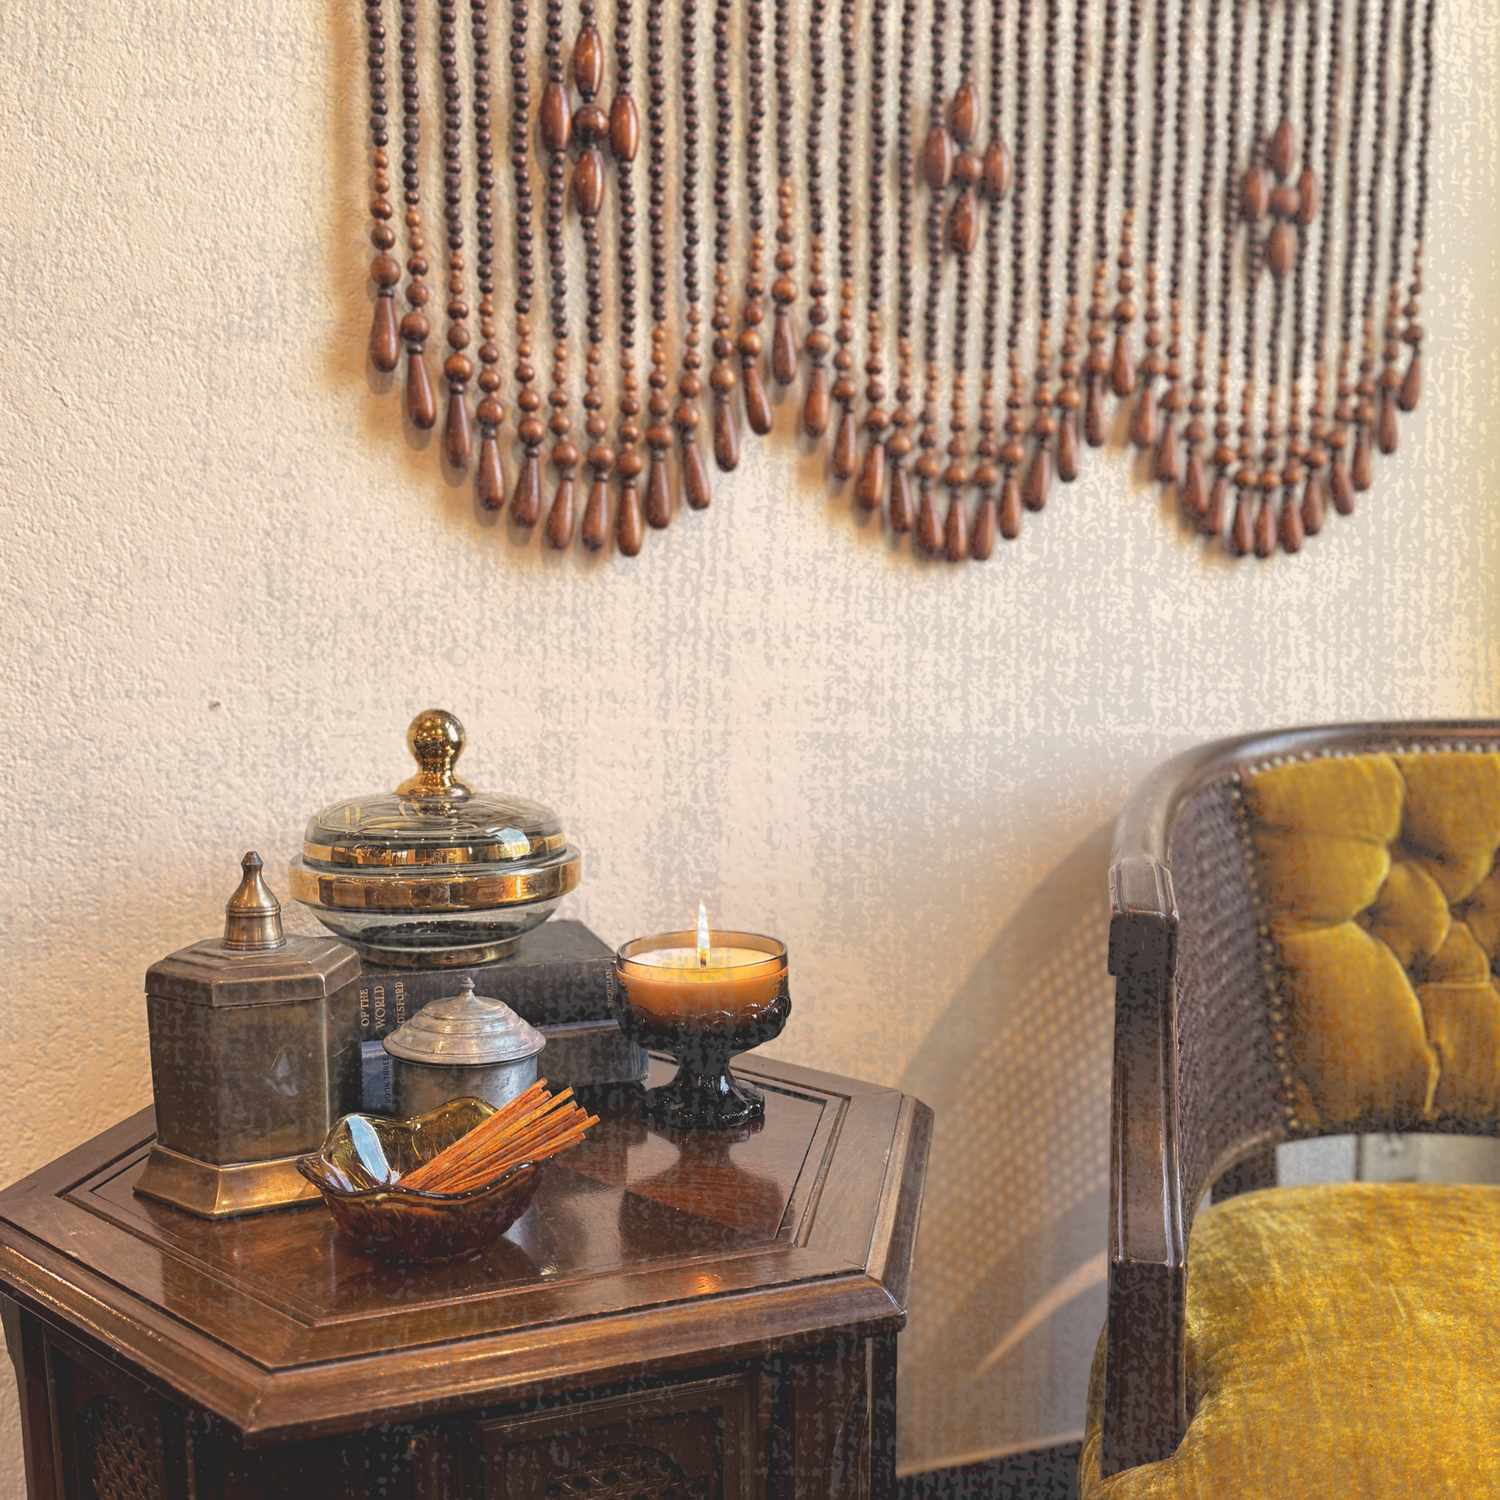 Metal and glass candles decorate a wooden side table and chair with beaded backdrop